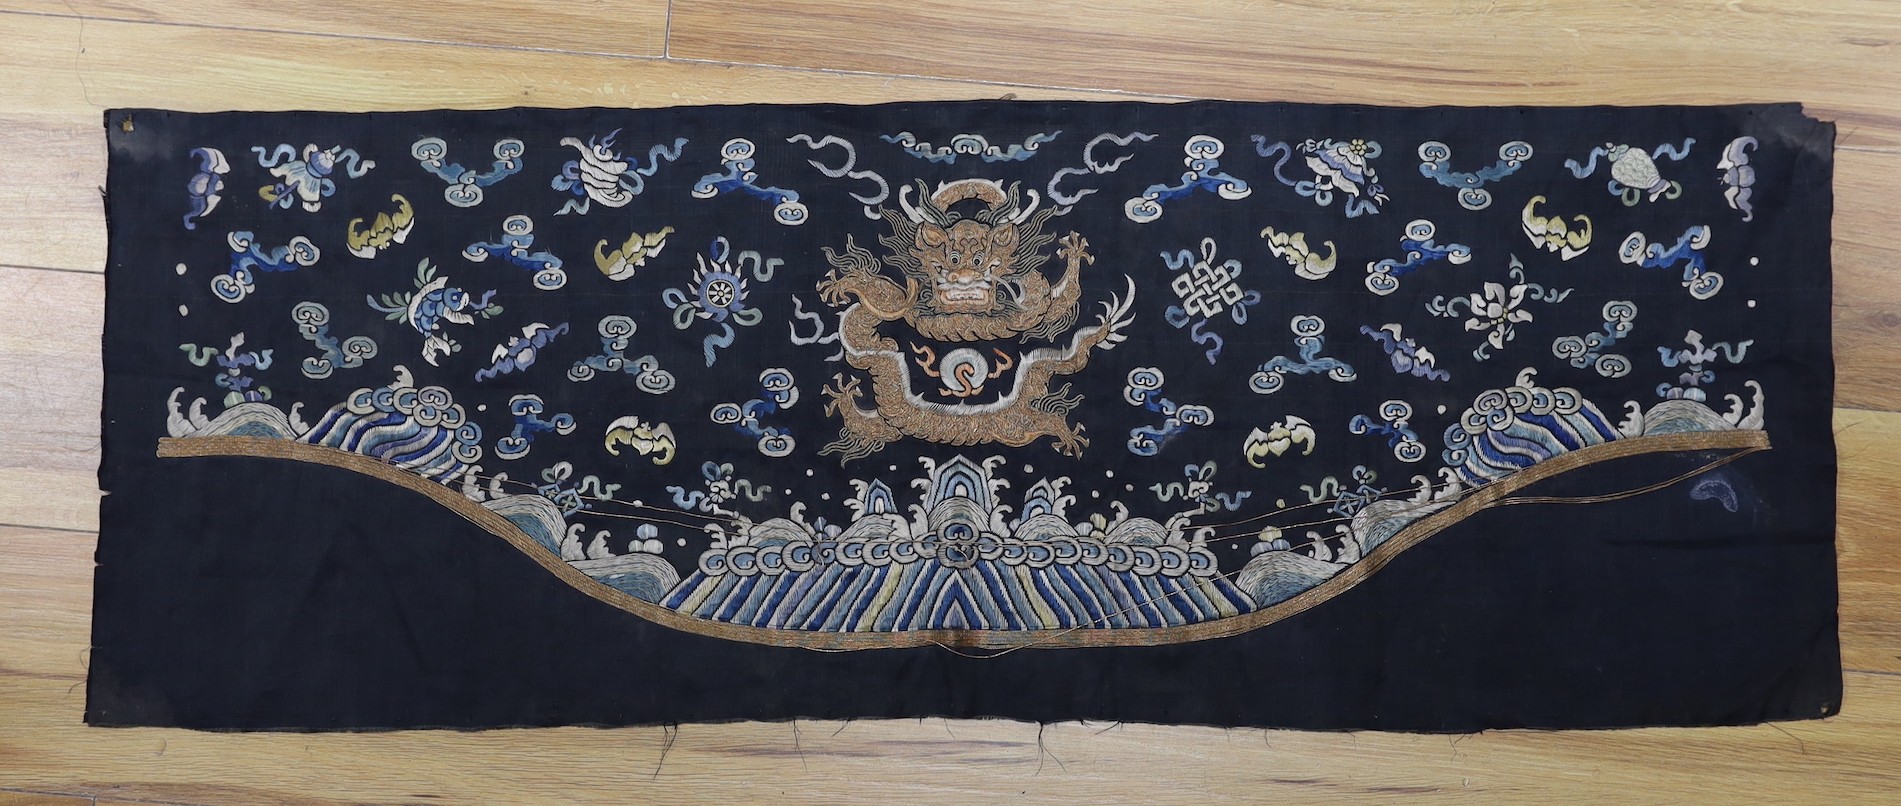 A Chinese late 19th century embroidery of a dragon, probably from a Chinese robe or hanging 37x105cm